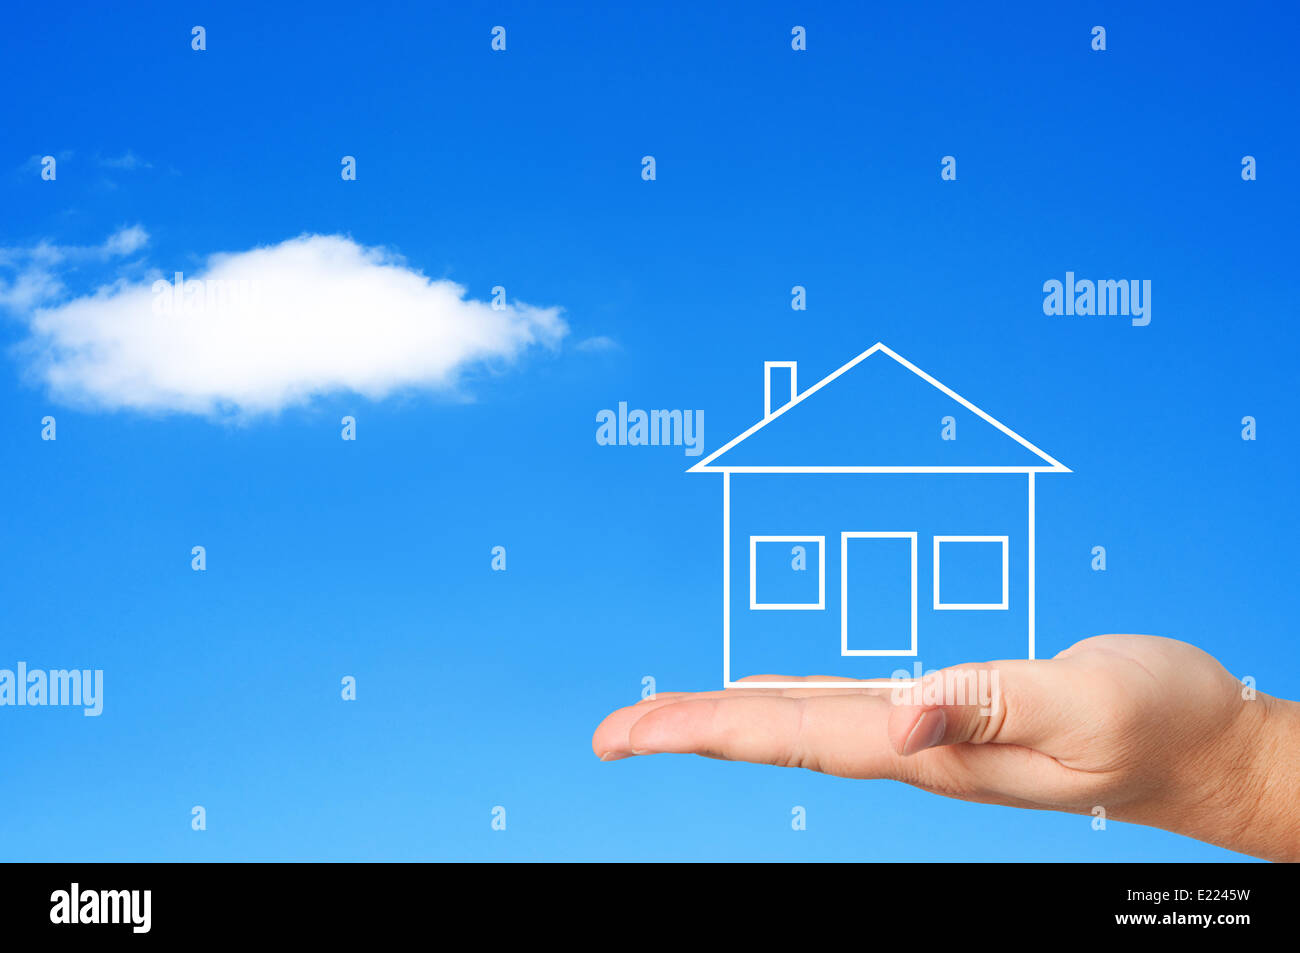 House on palm concept housing. Stock Photo